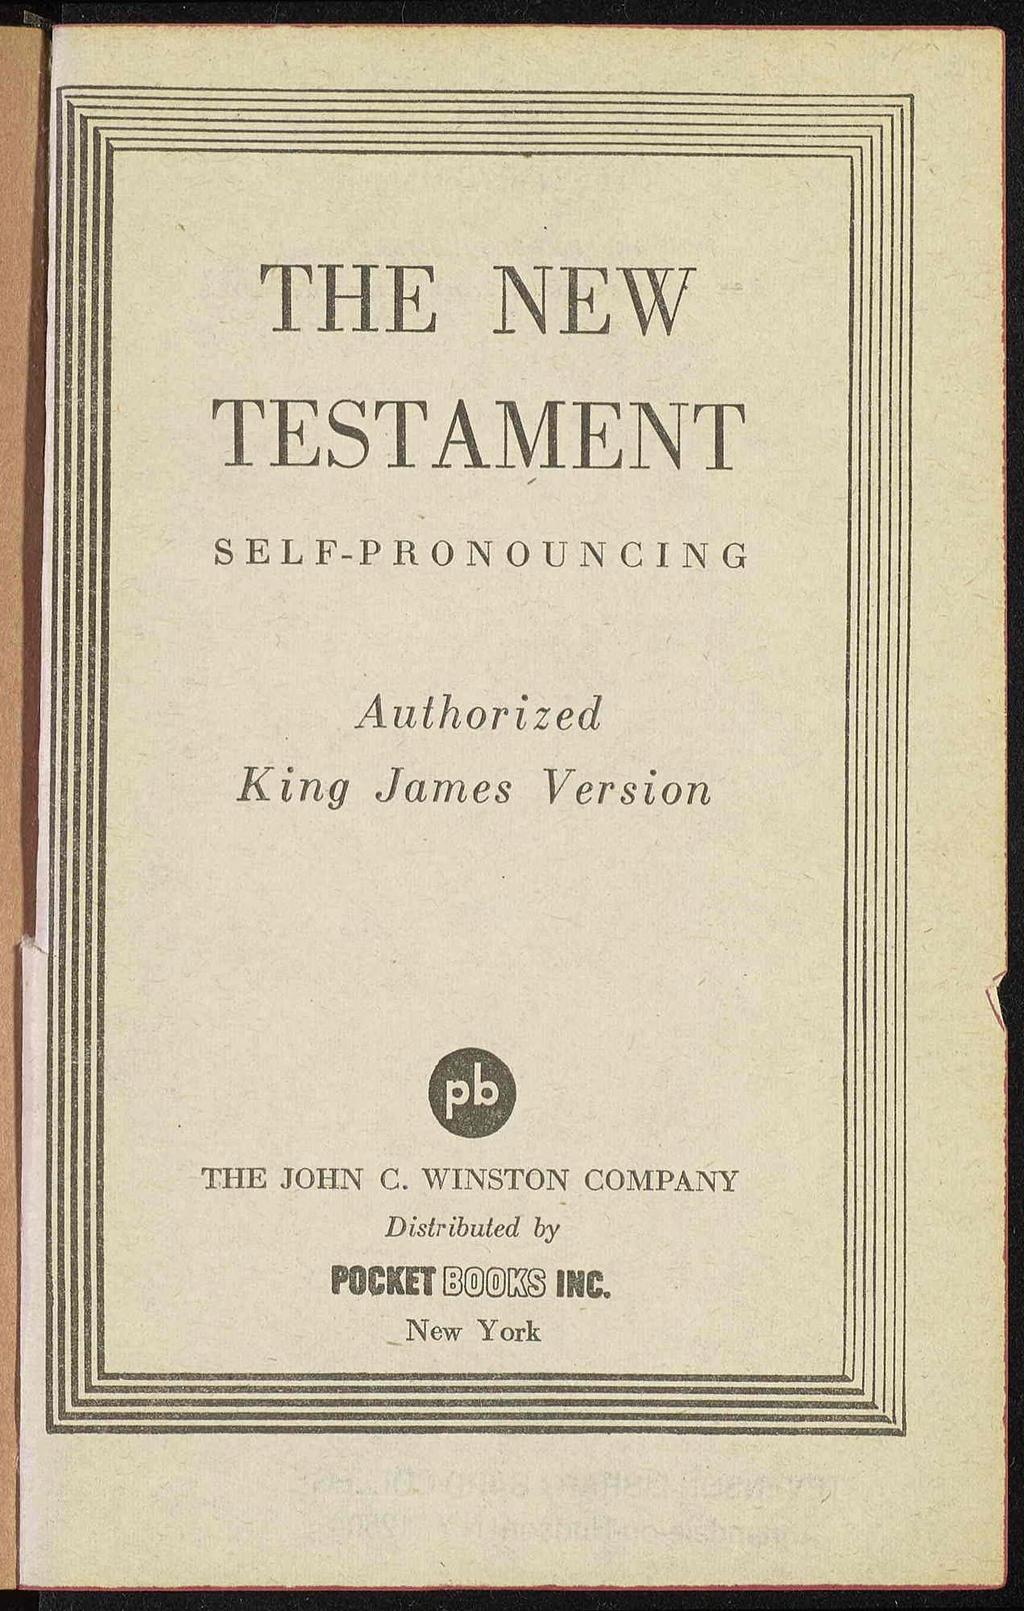 THE NEW TESTAMENT SELF-PRONOUNCING Authorized King James Version